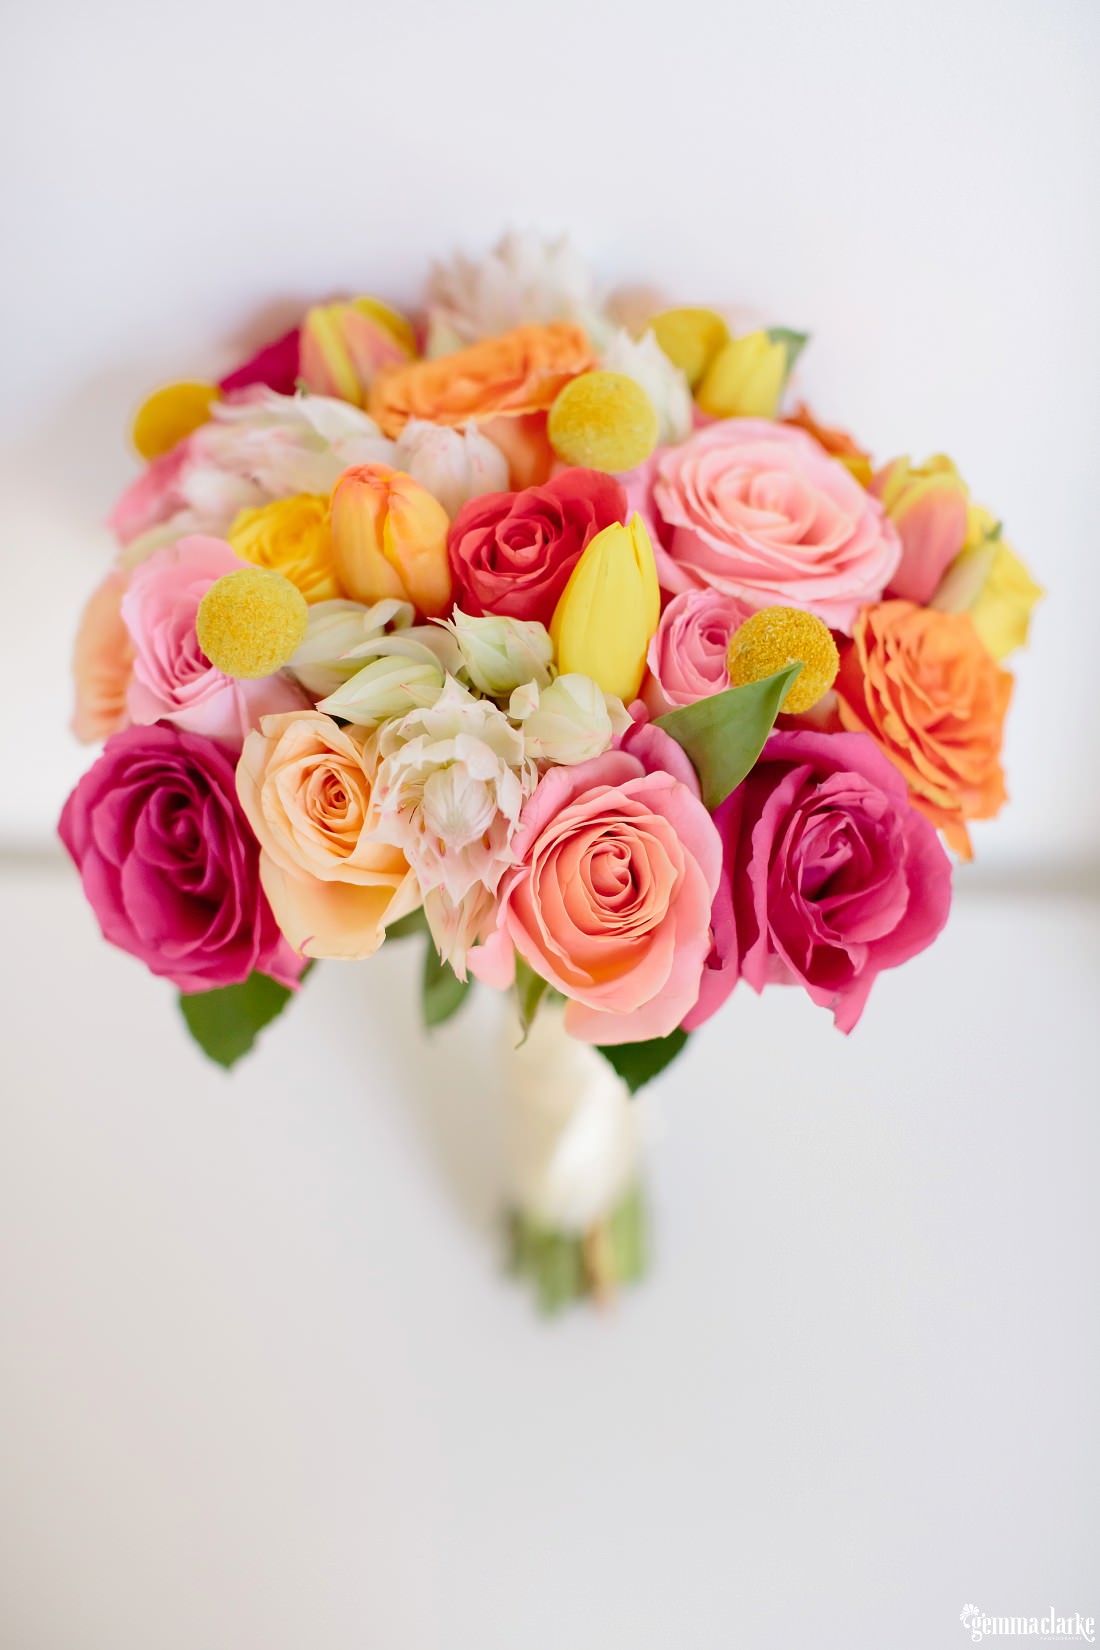 A lovely brightly coloured bridal bouquet - Zest at the Spit